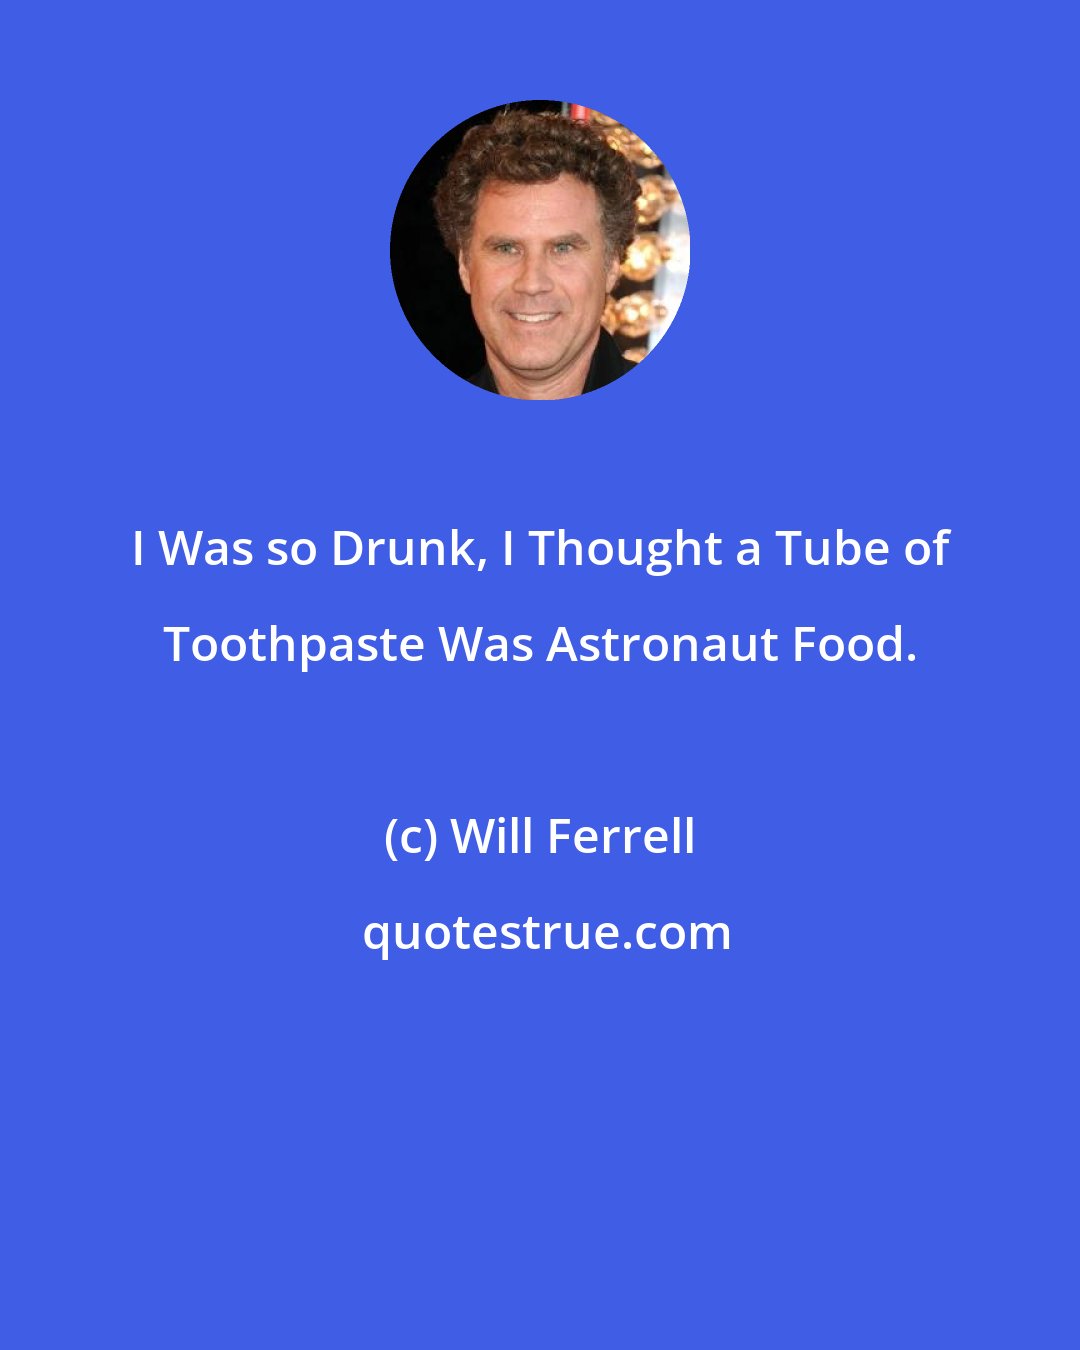 Will Ferrell: I Was so Drunk, I Thought a Tube of Toothpaste Was Astronaut Food.